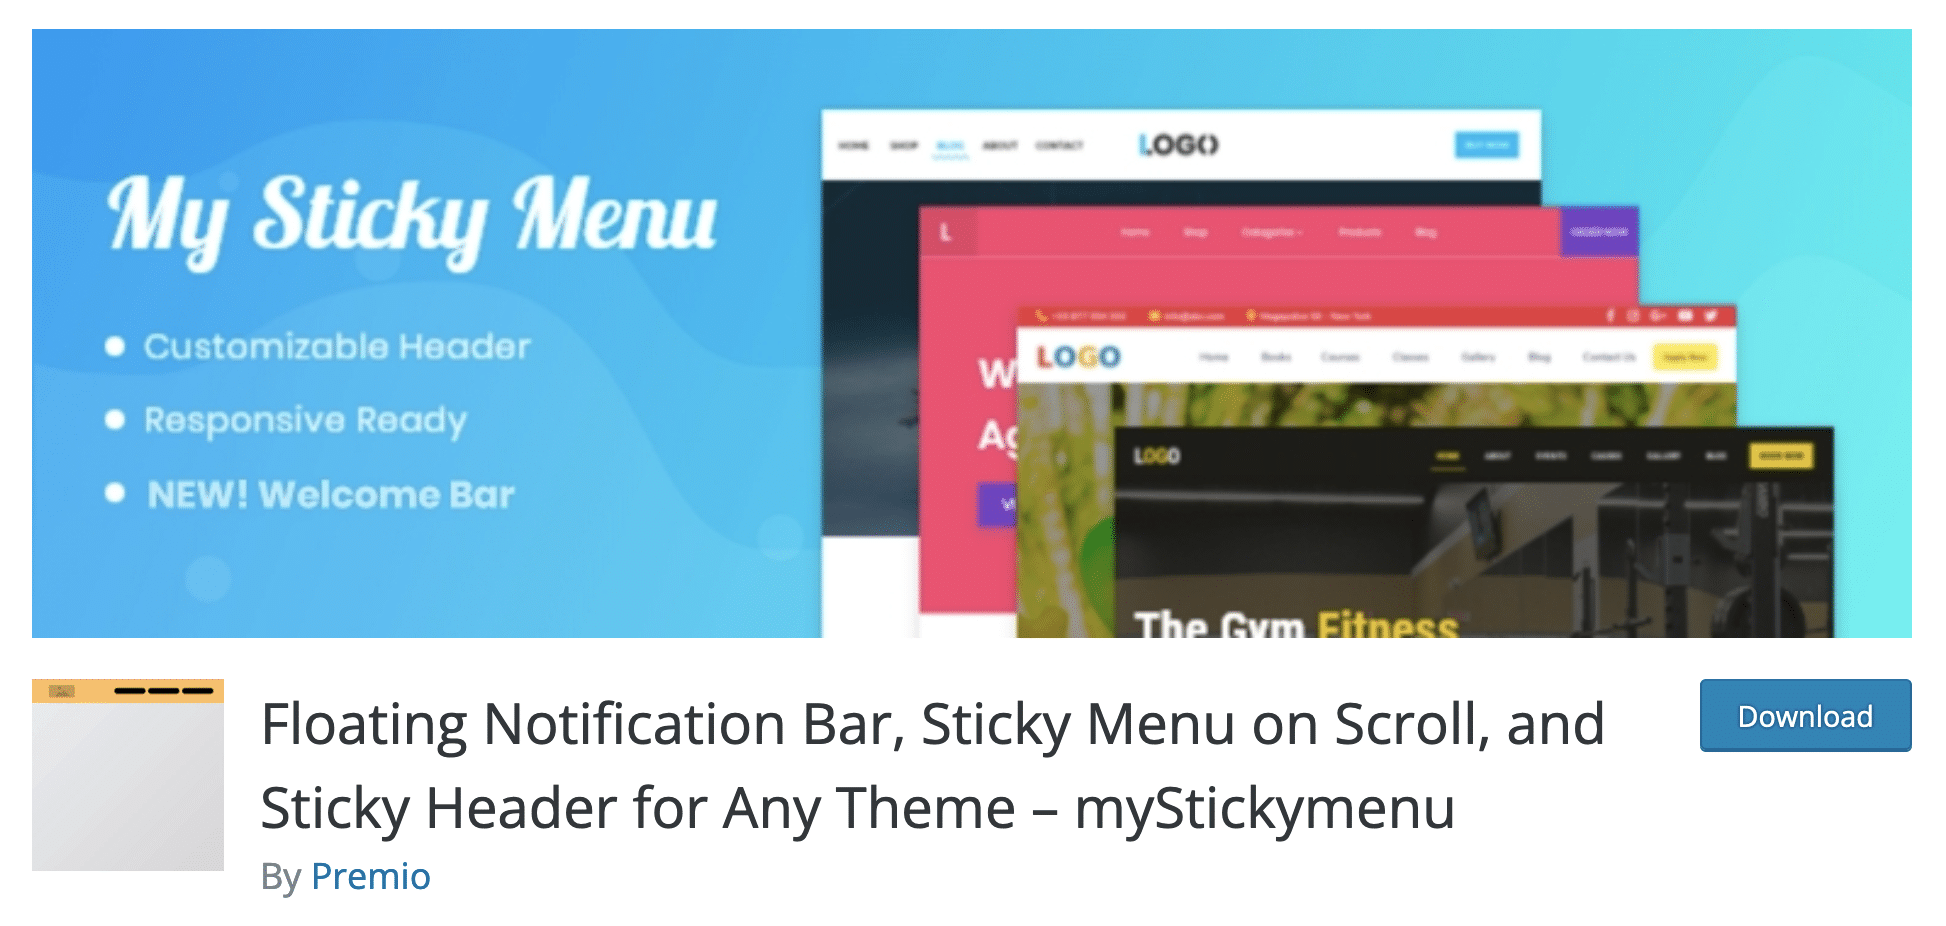 My Sticky Menu helps to create a menu displayed at the top of the screen on WordPress.
